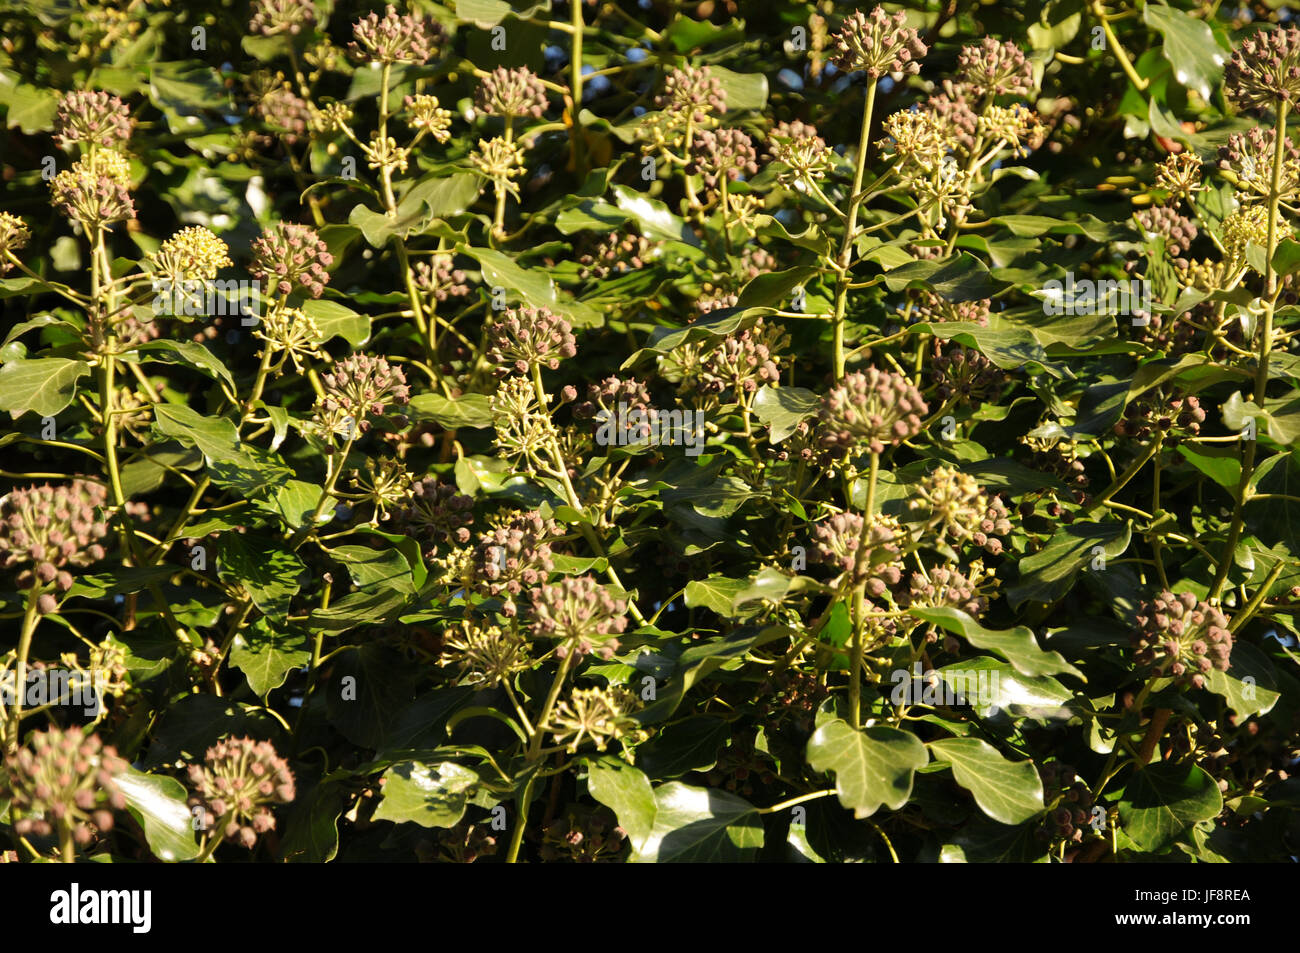 Hedera helix, Ivy, flowers, fruits Stock Photo